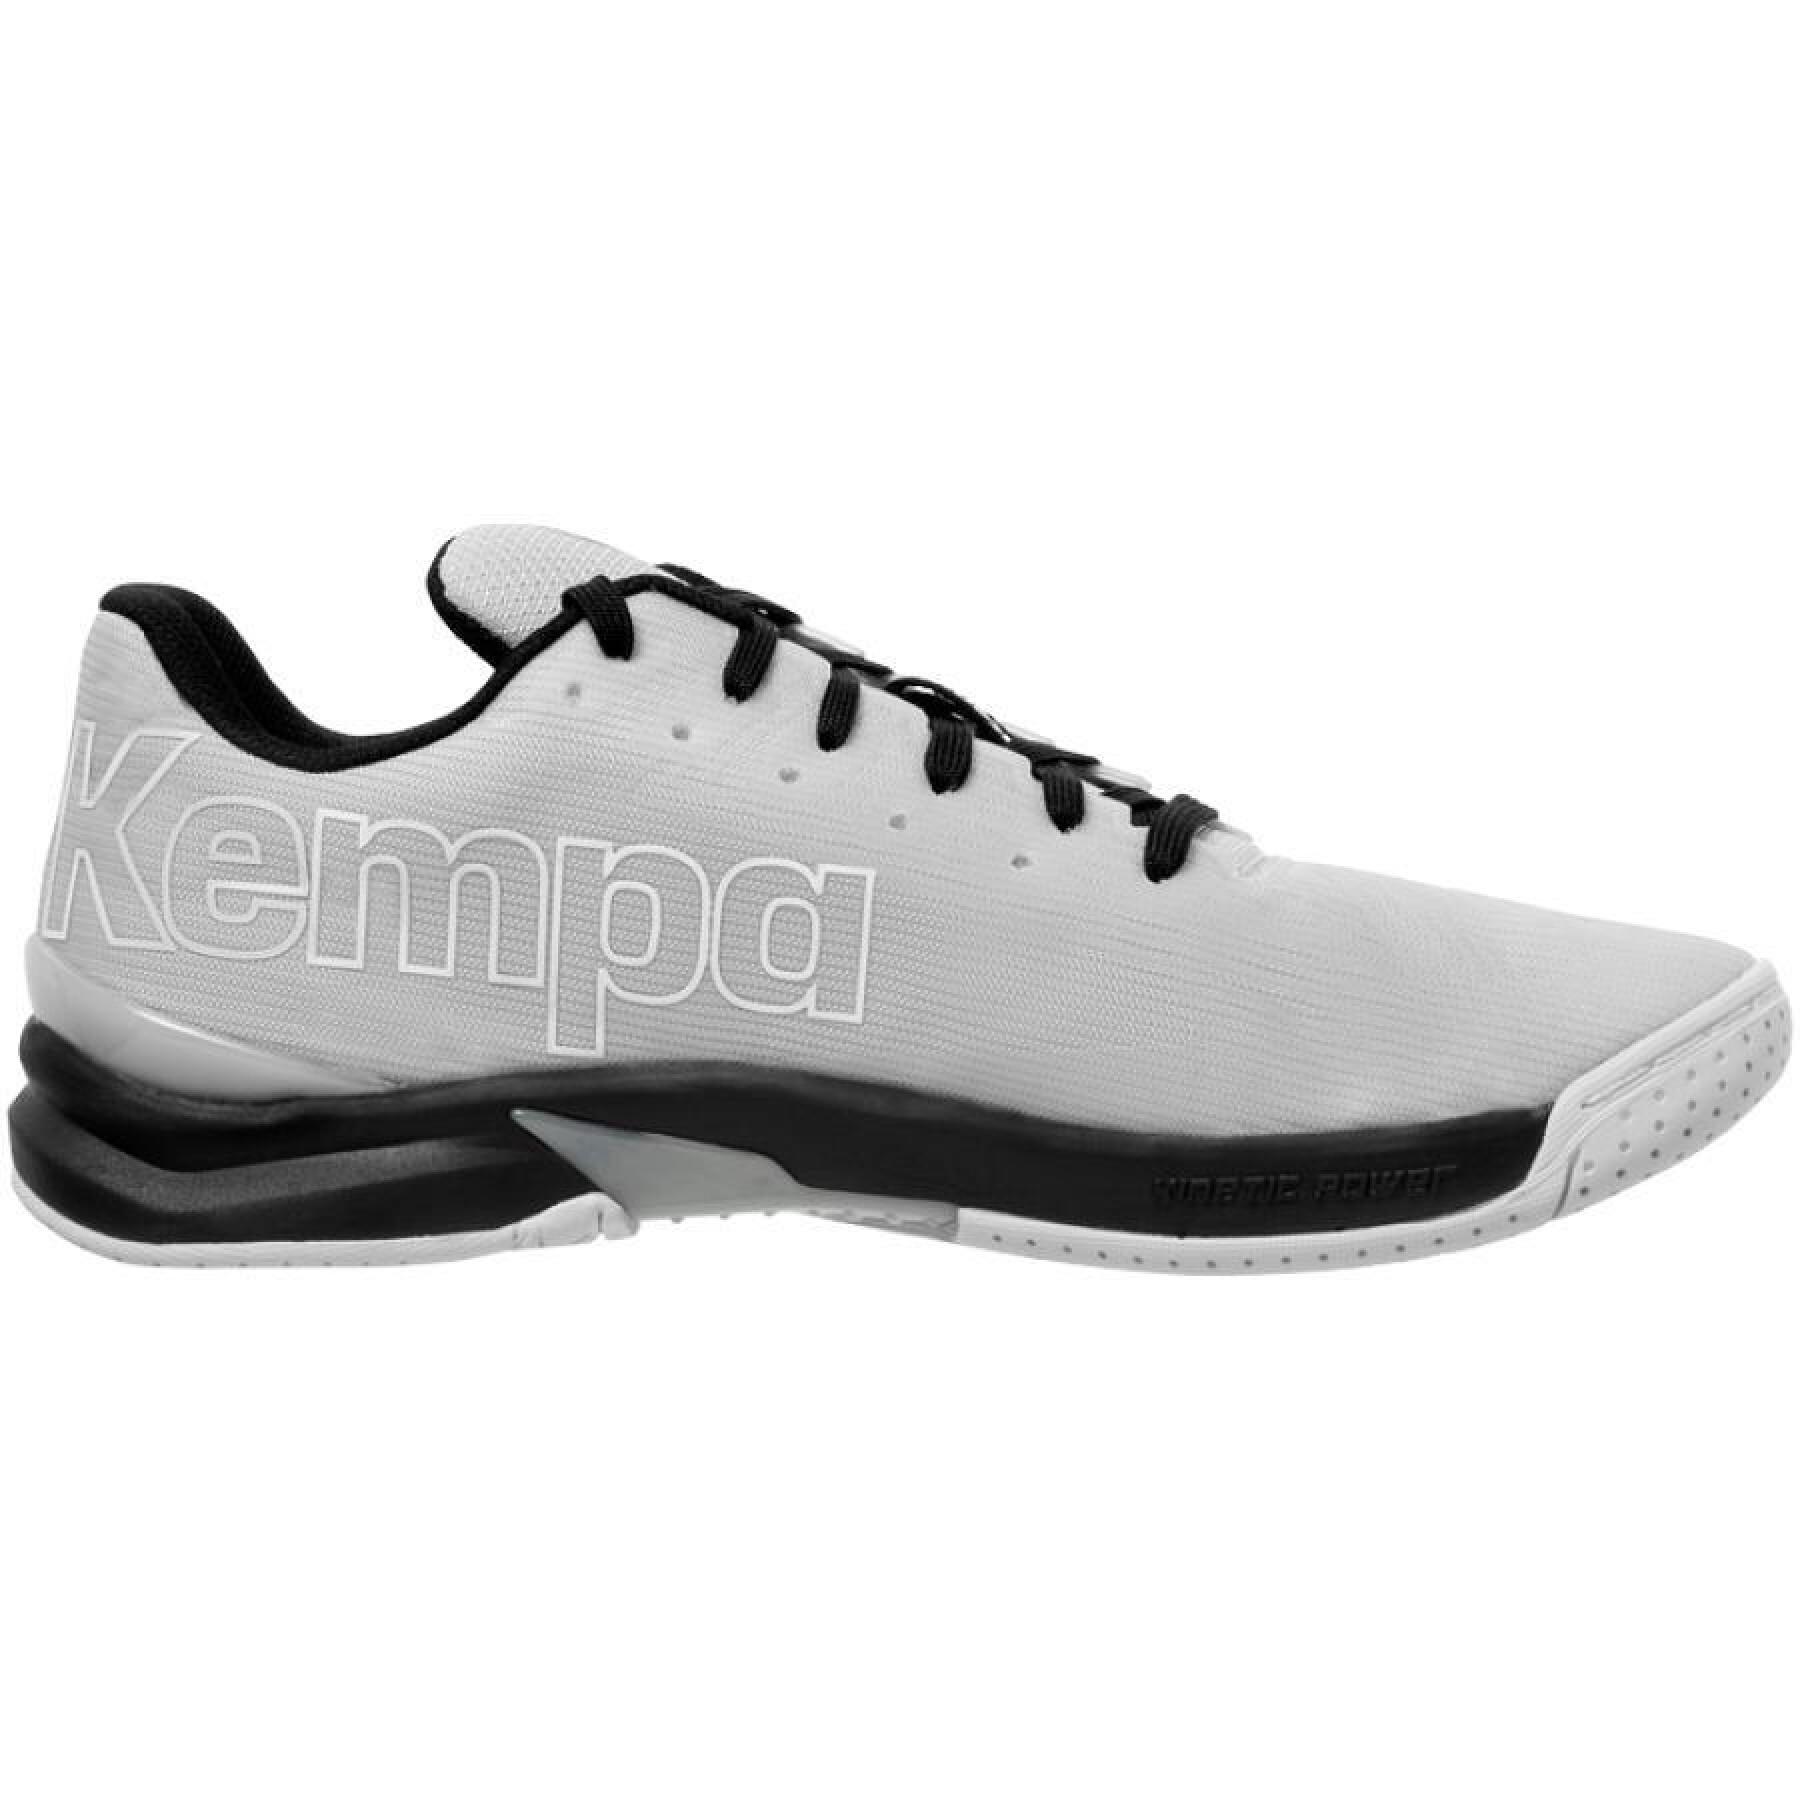 Chaussures indoor Kempa Attack One 2.1